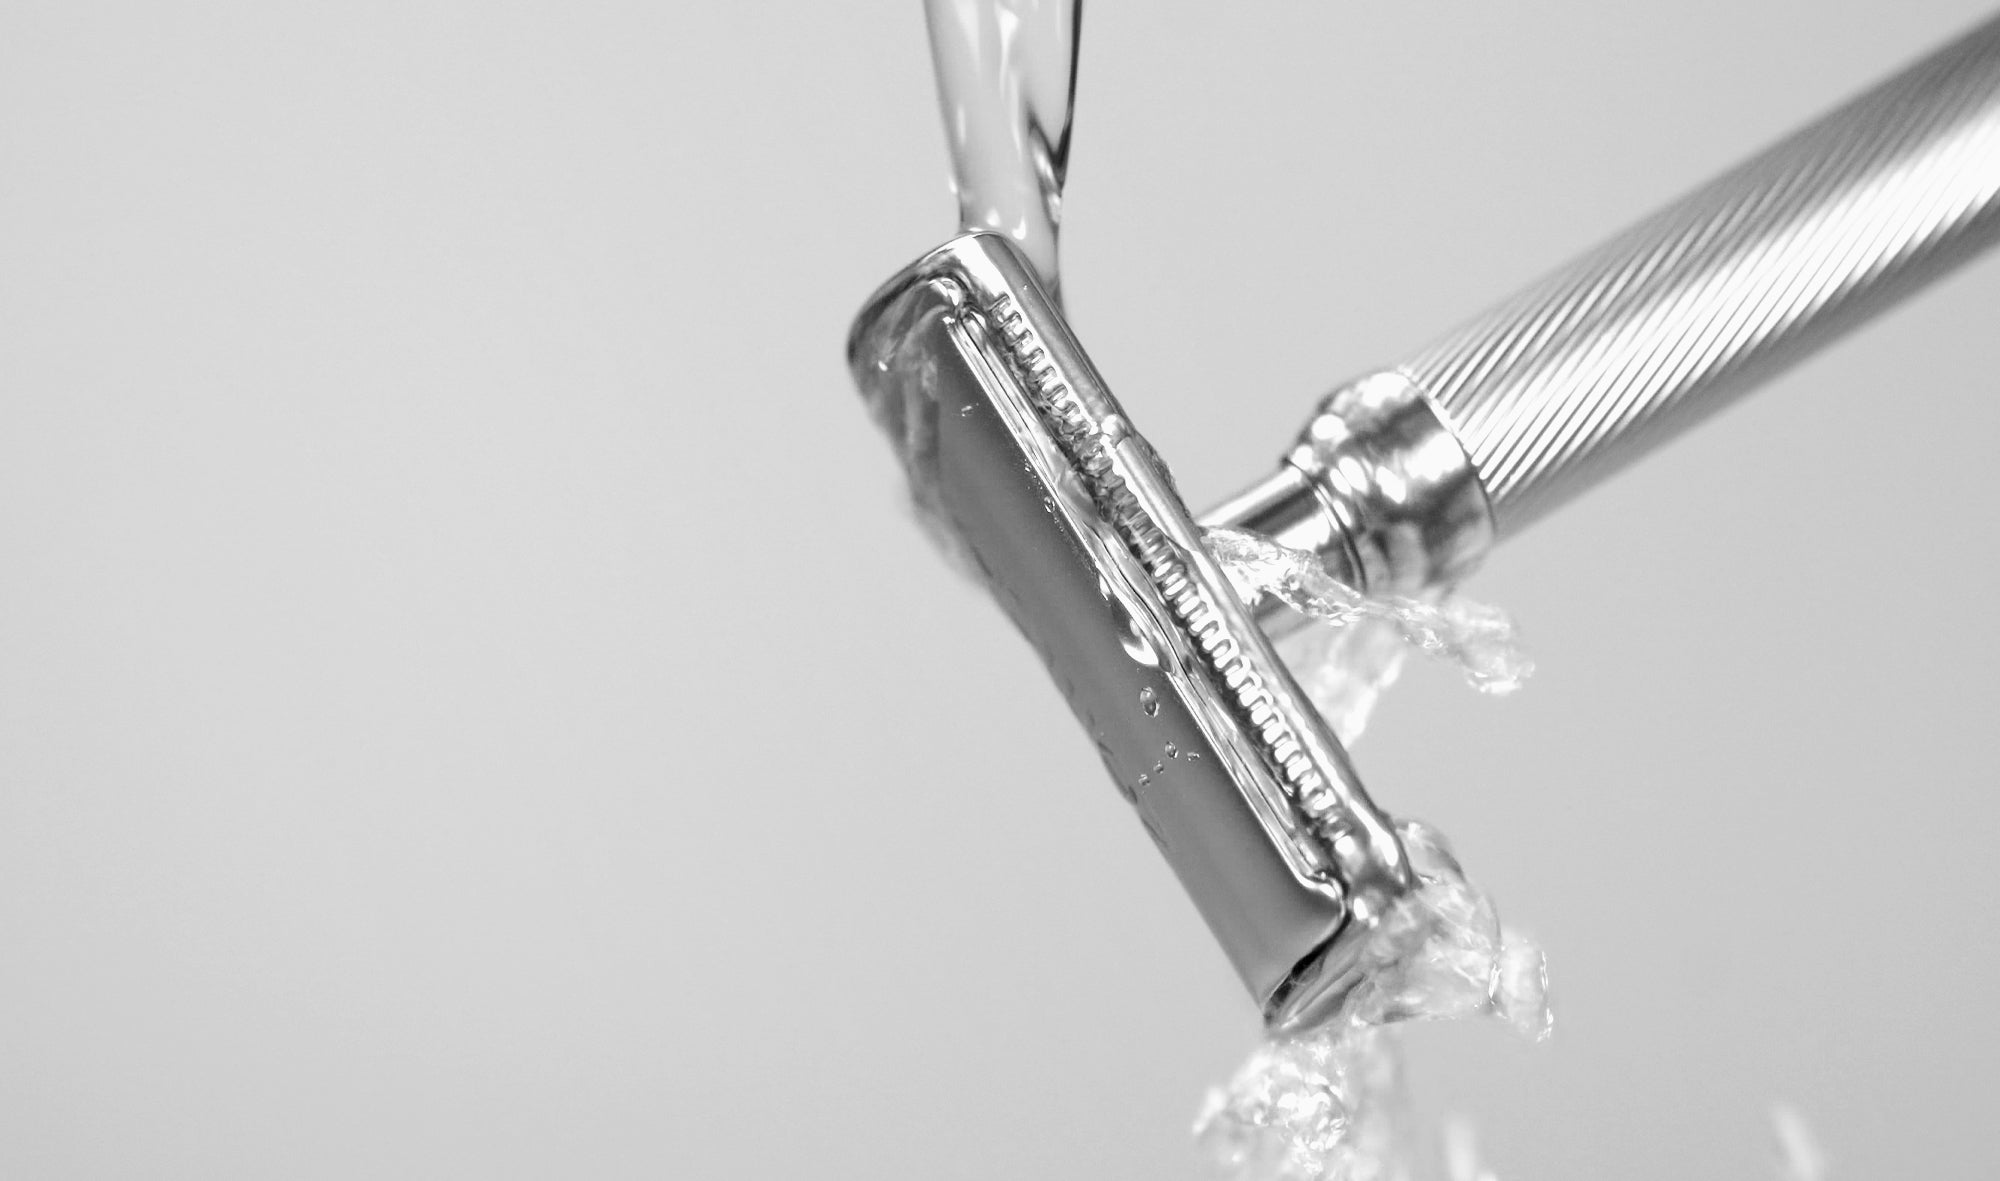 How to clean safety razor